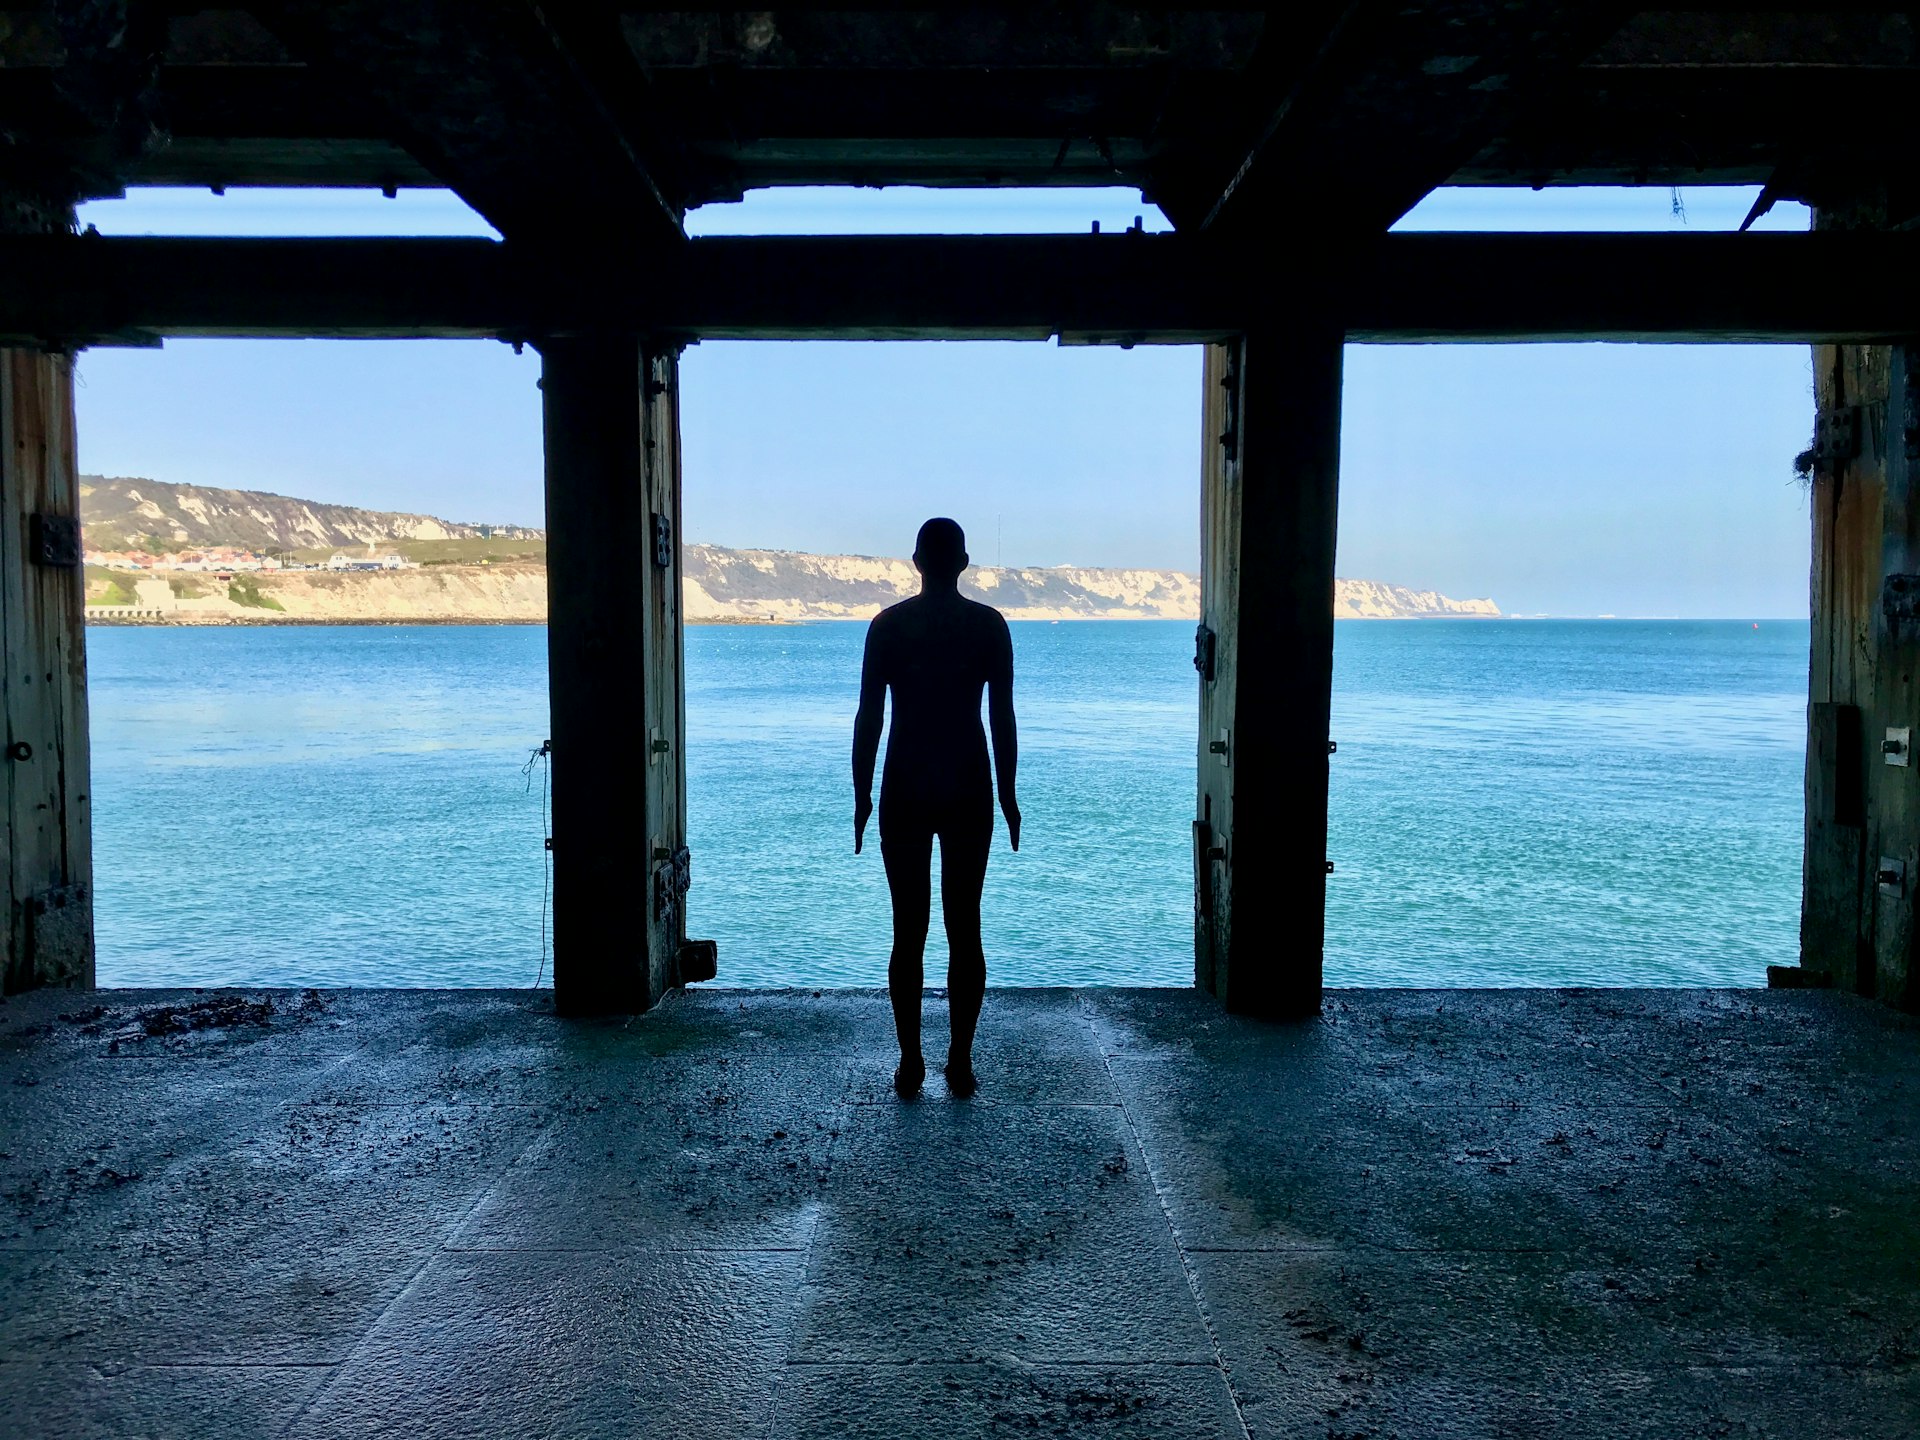 A cast iron figure by sculptor Antony Gormley stands in a shell of a building, looking out upon cliffs and the sea in Folkestone.